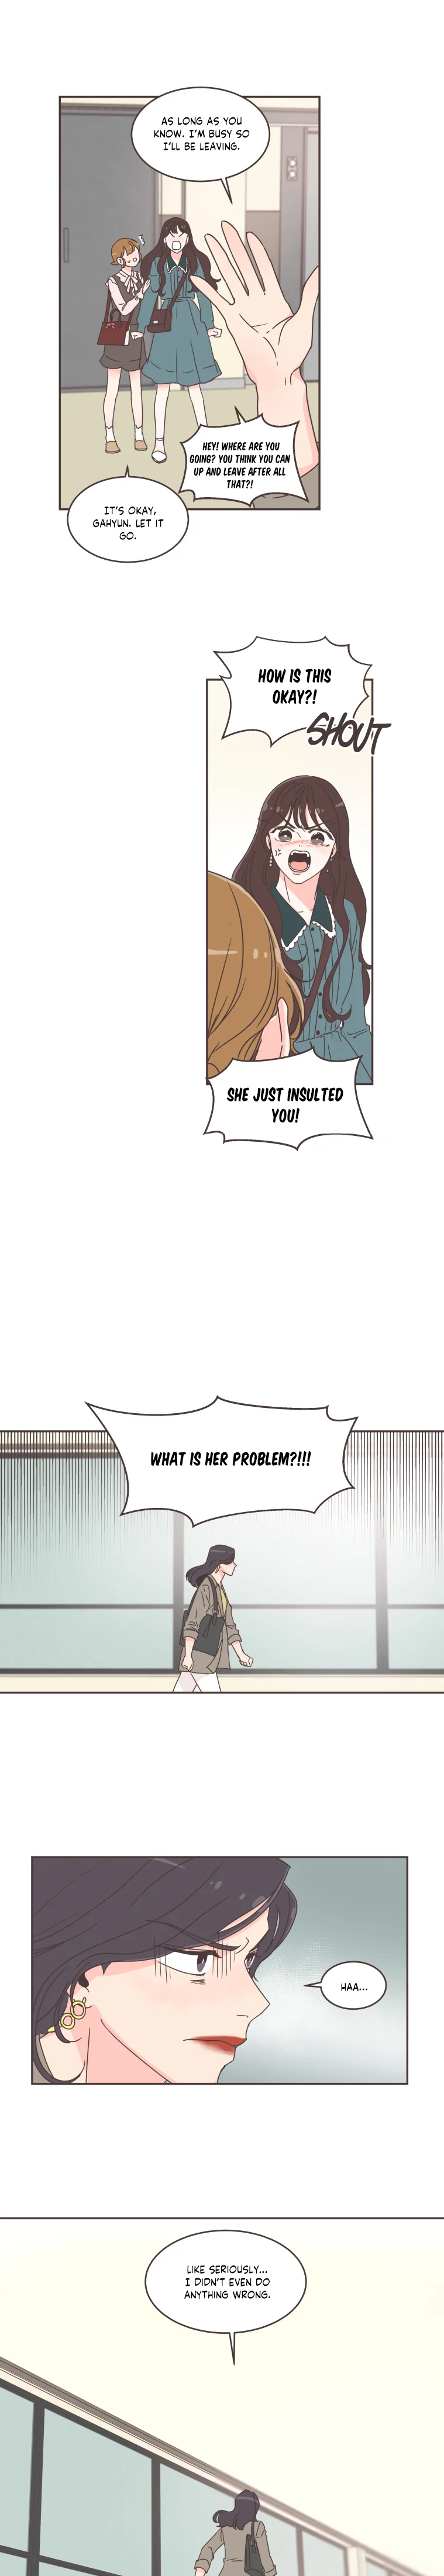 She's My Type - Chapter 44 Page 3